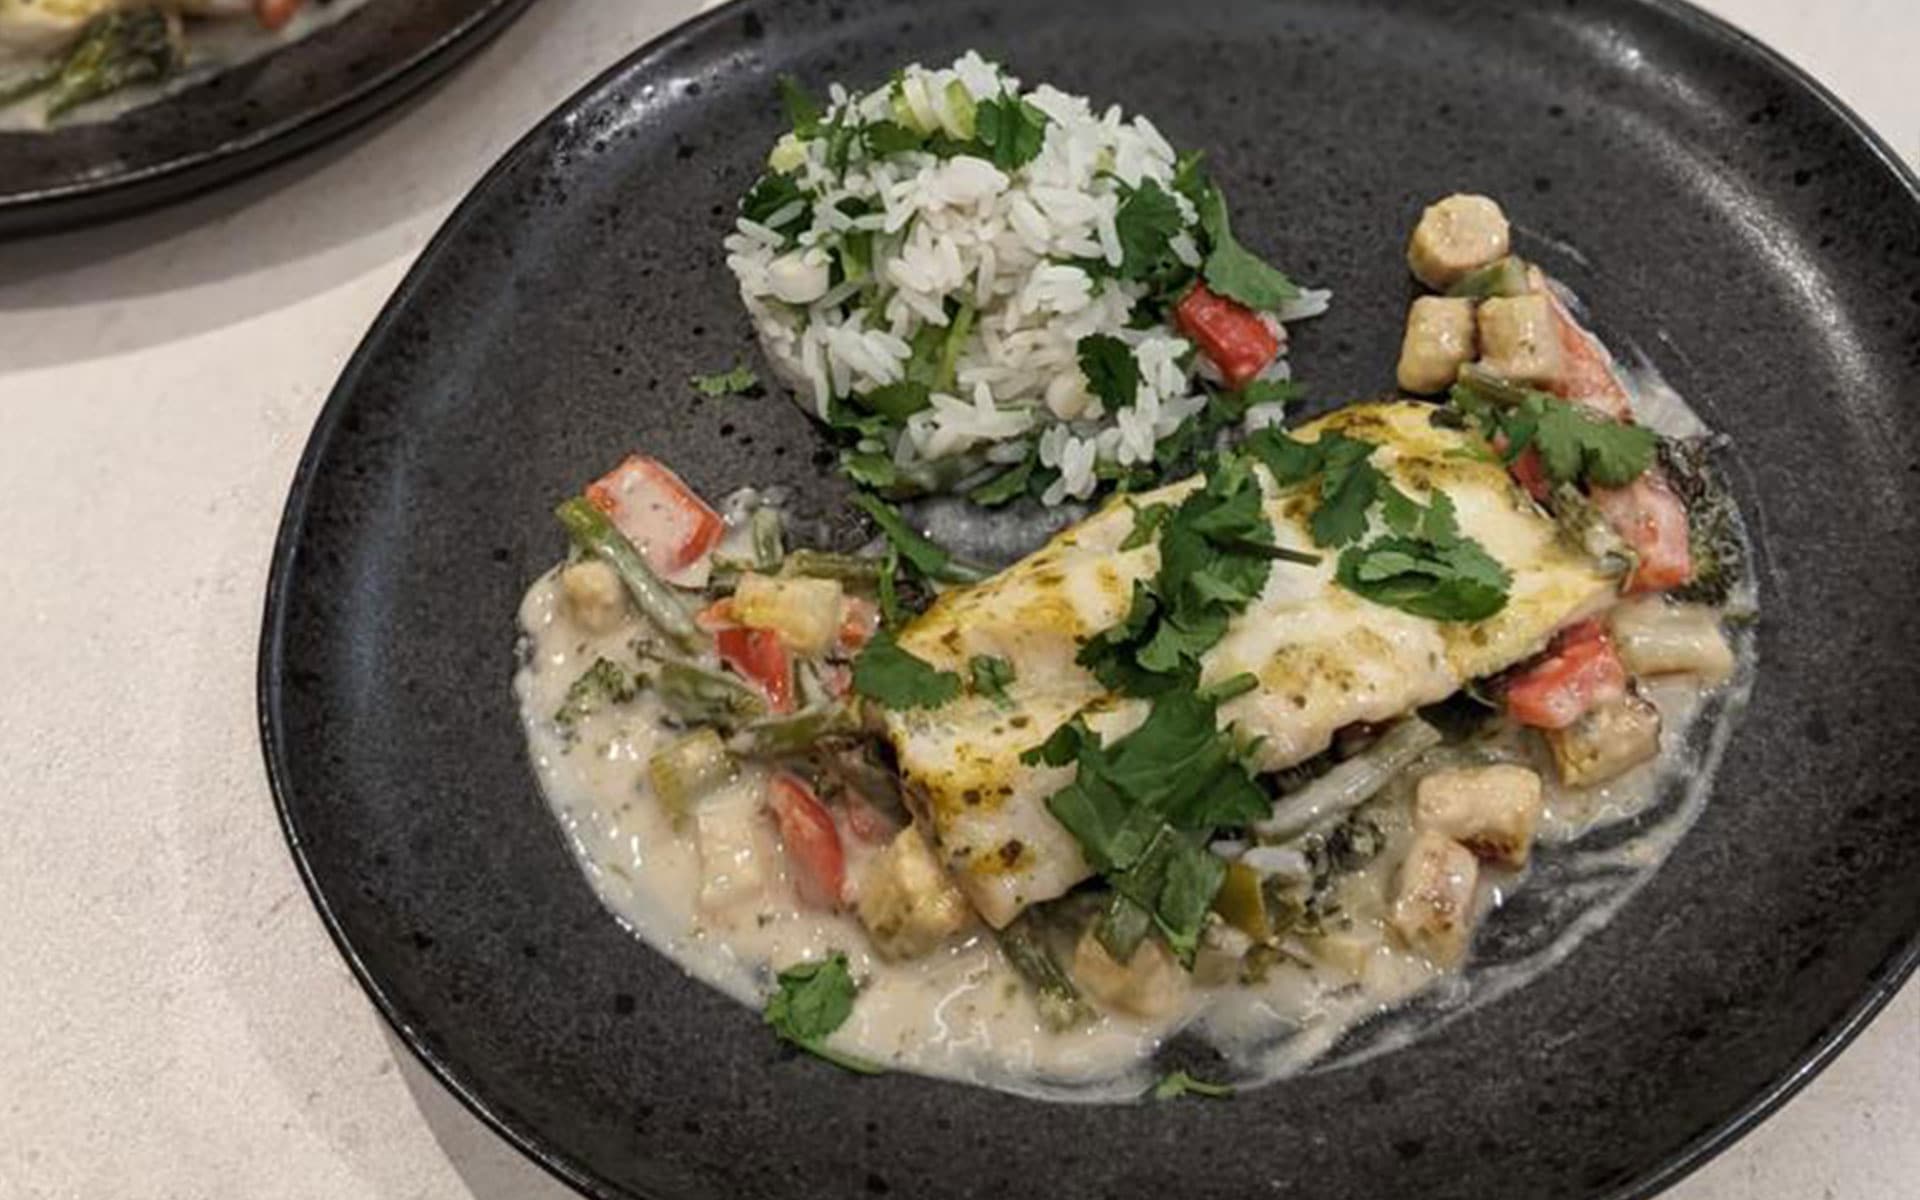 Thai fish curry using the Siemens steam oven